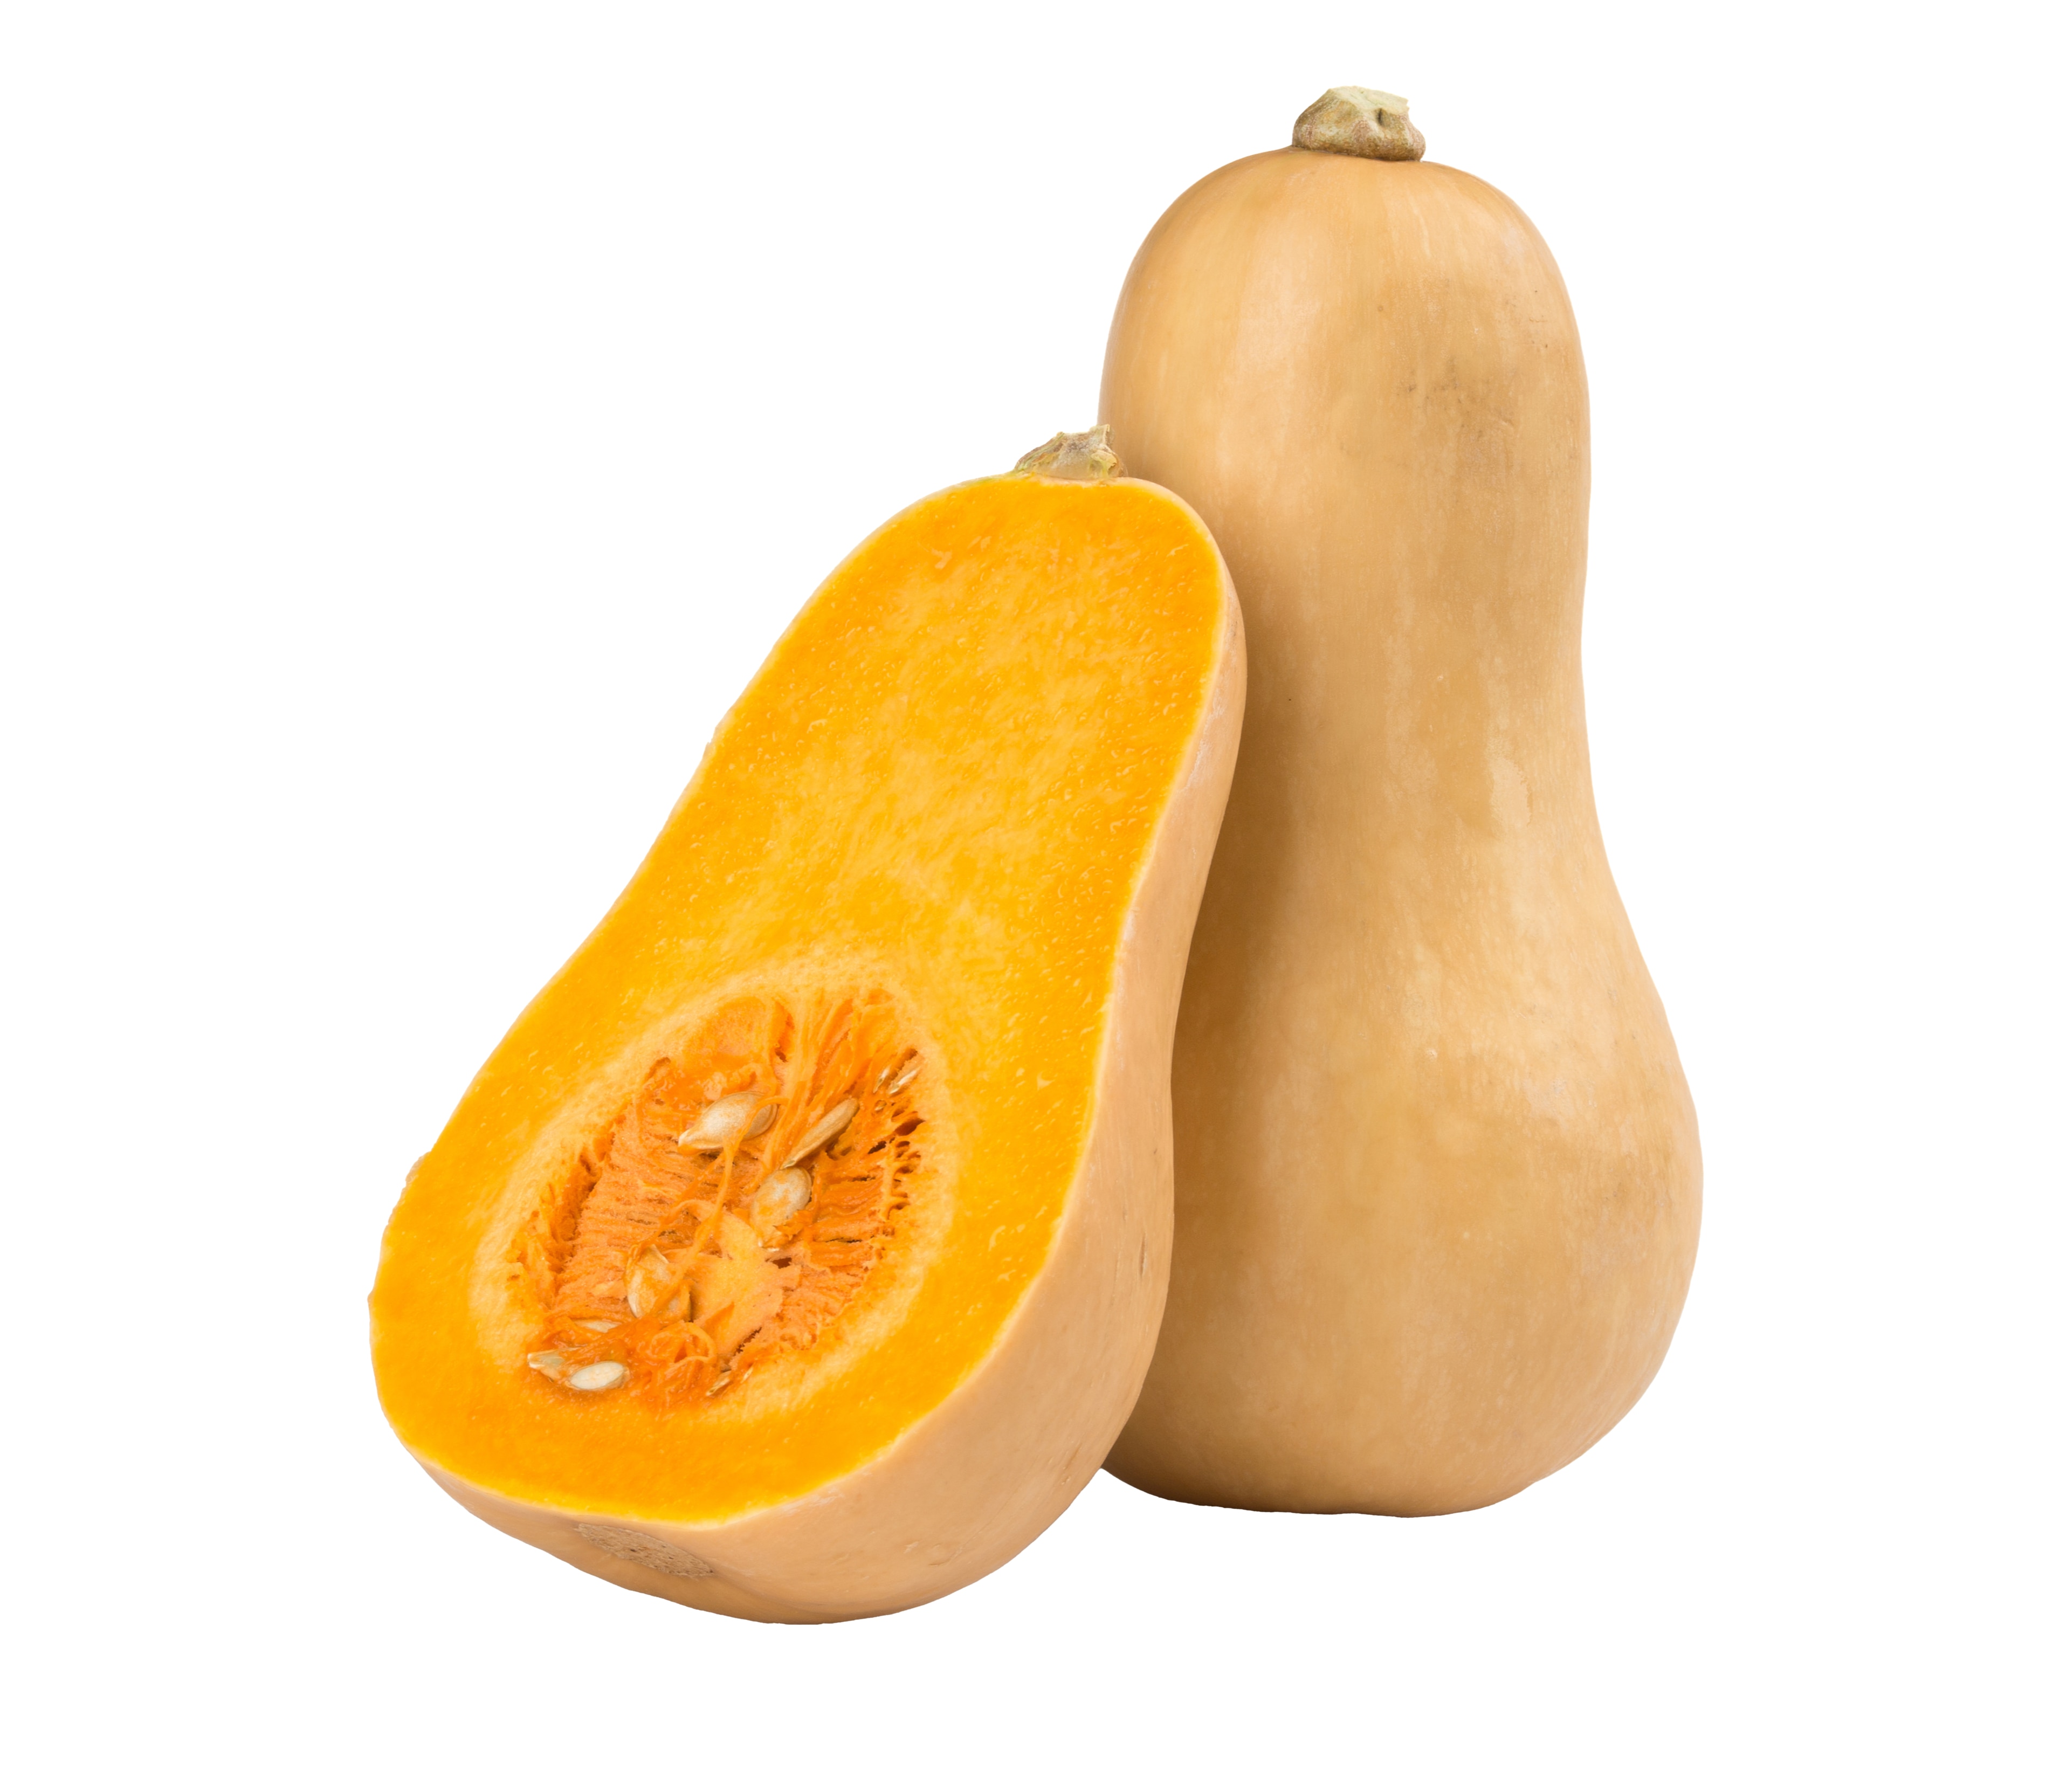 Waltham Butternut Variety from Royal Seed